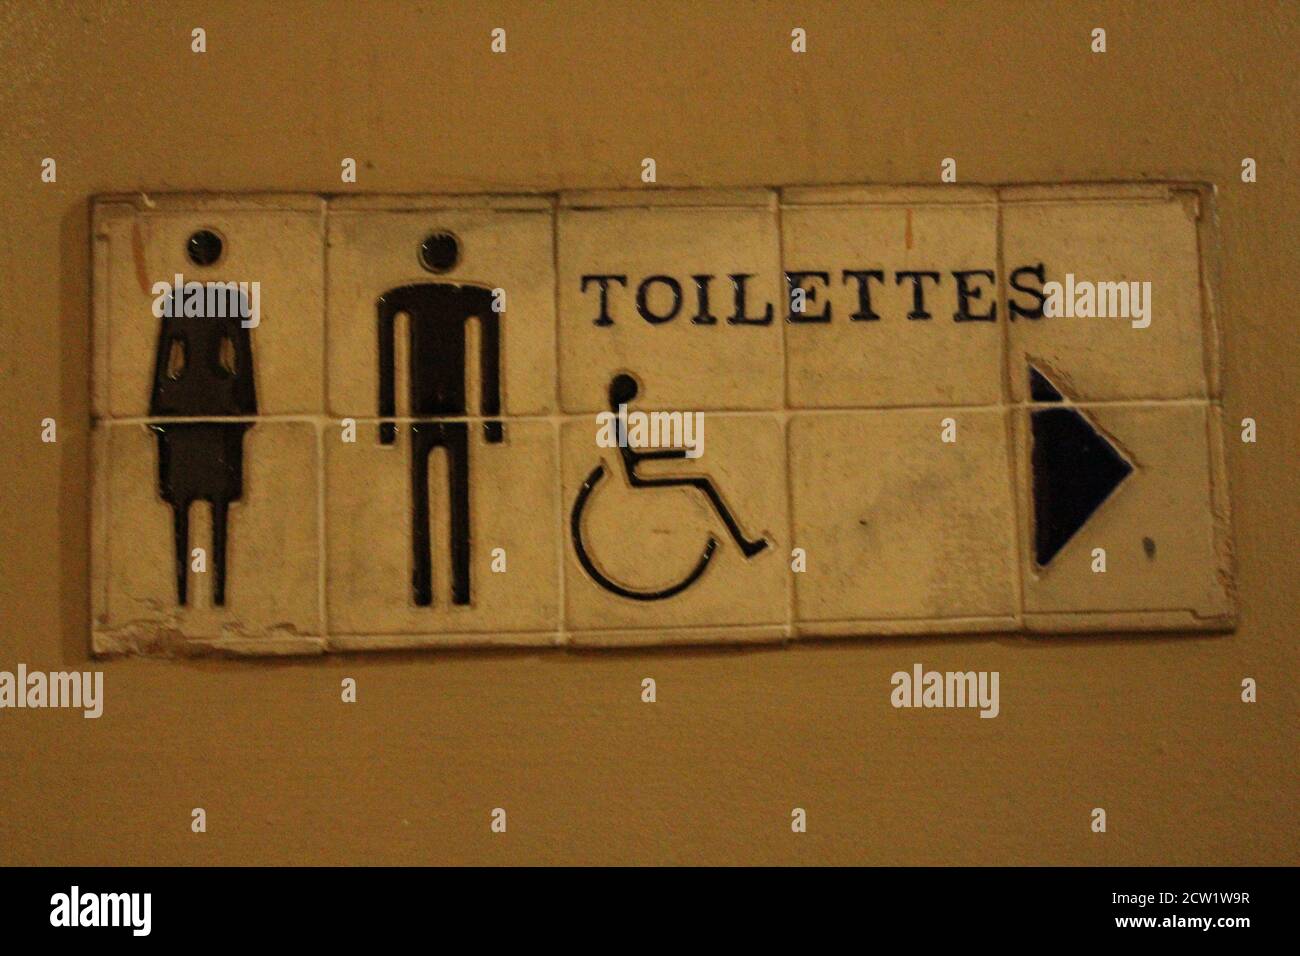 Toilettes sign New Orleans Stock Photo